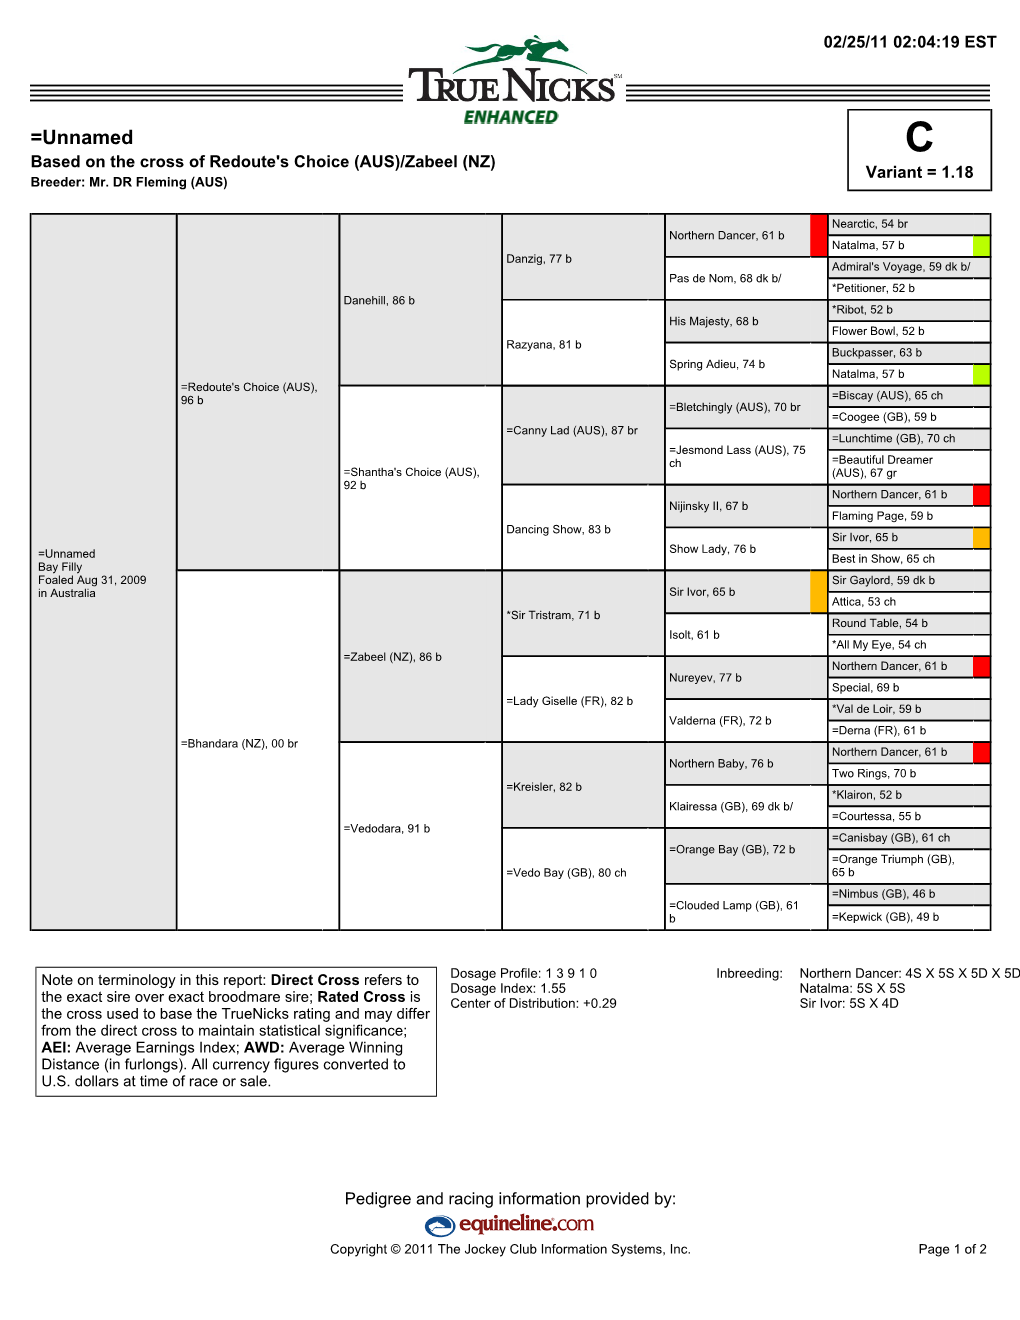 =Unnamed C Based on the Cross of Redoute's Choice (AUS)/Zabeel (NZ) Variant = 1.18 Breeder: Mr